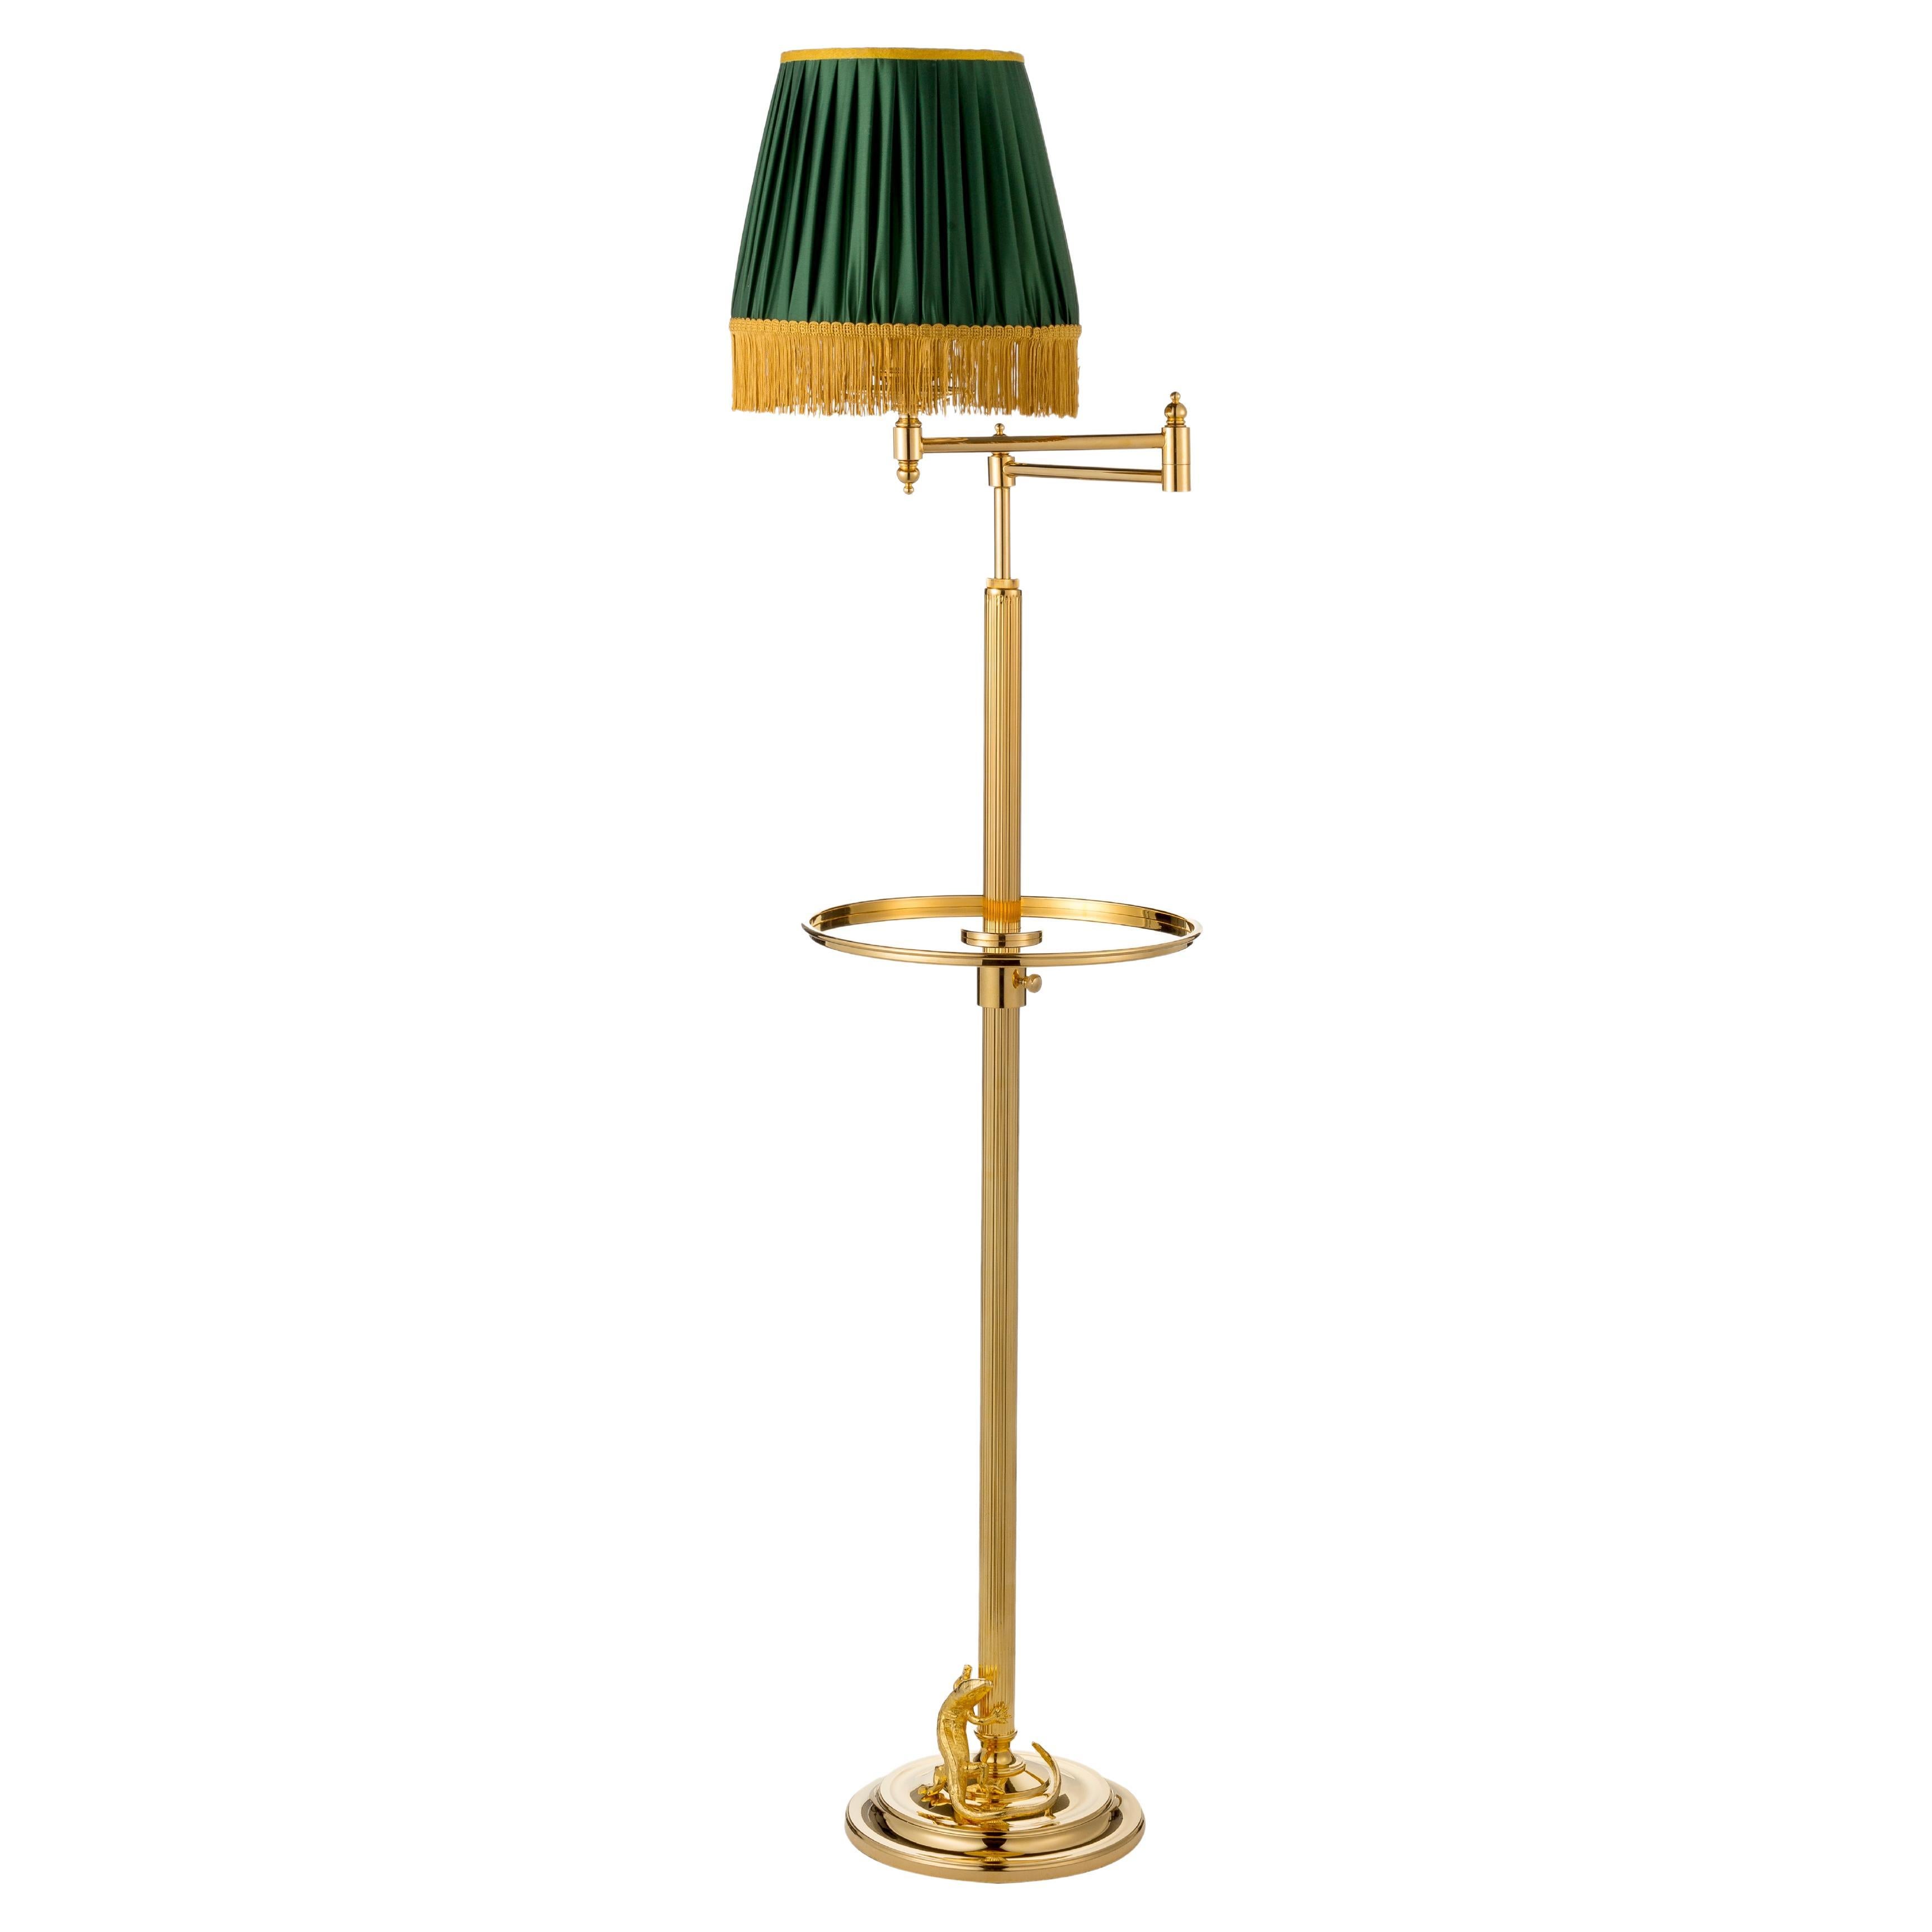 Adjustable Floor Lamp with Naural Brass Structure and Jointed Arms, Fabric Lam For Sale